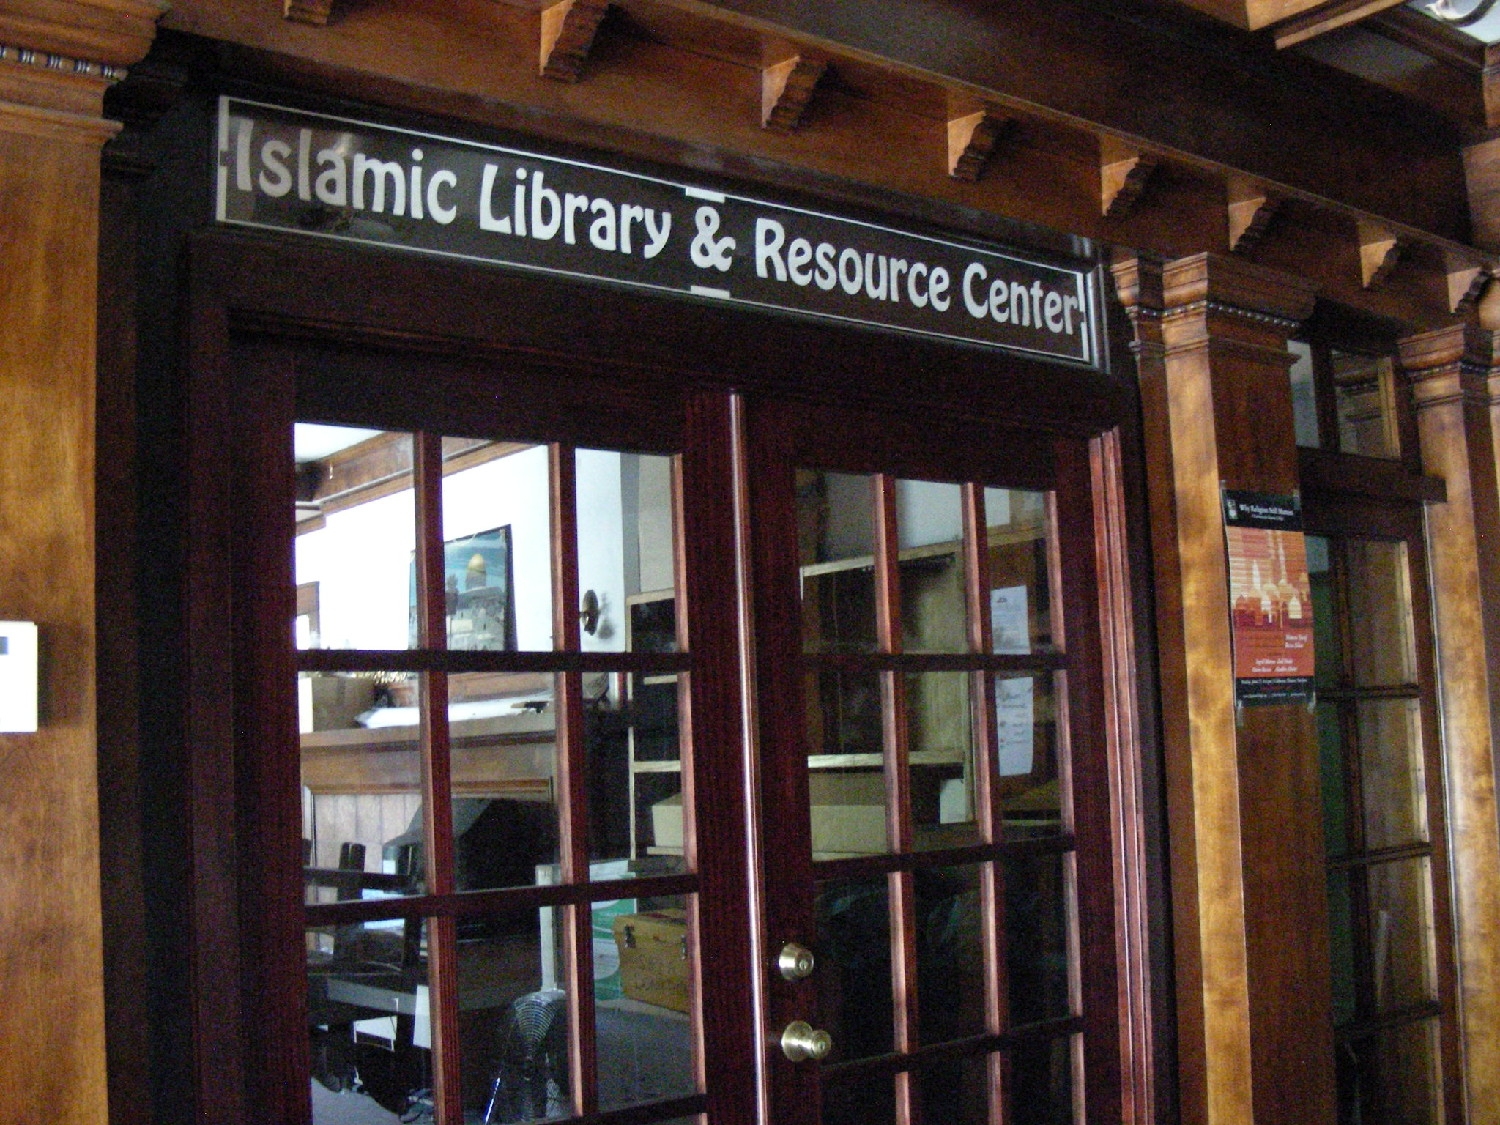 Entrance to the library and resource center